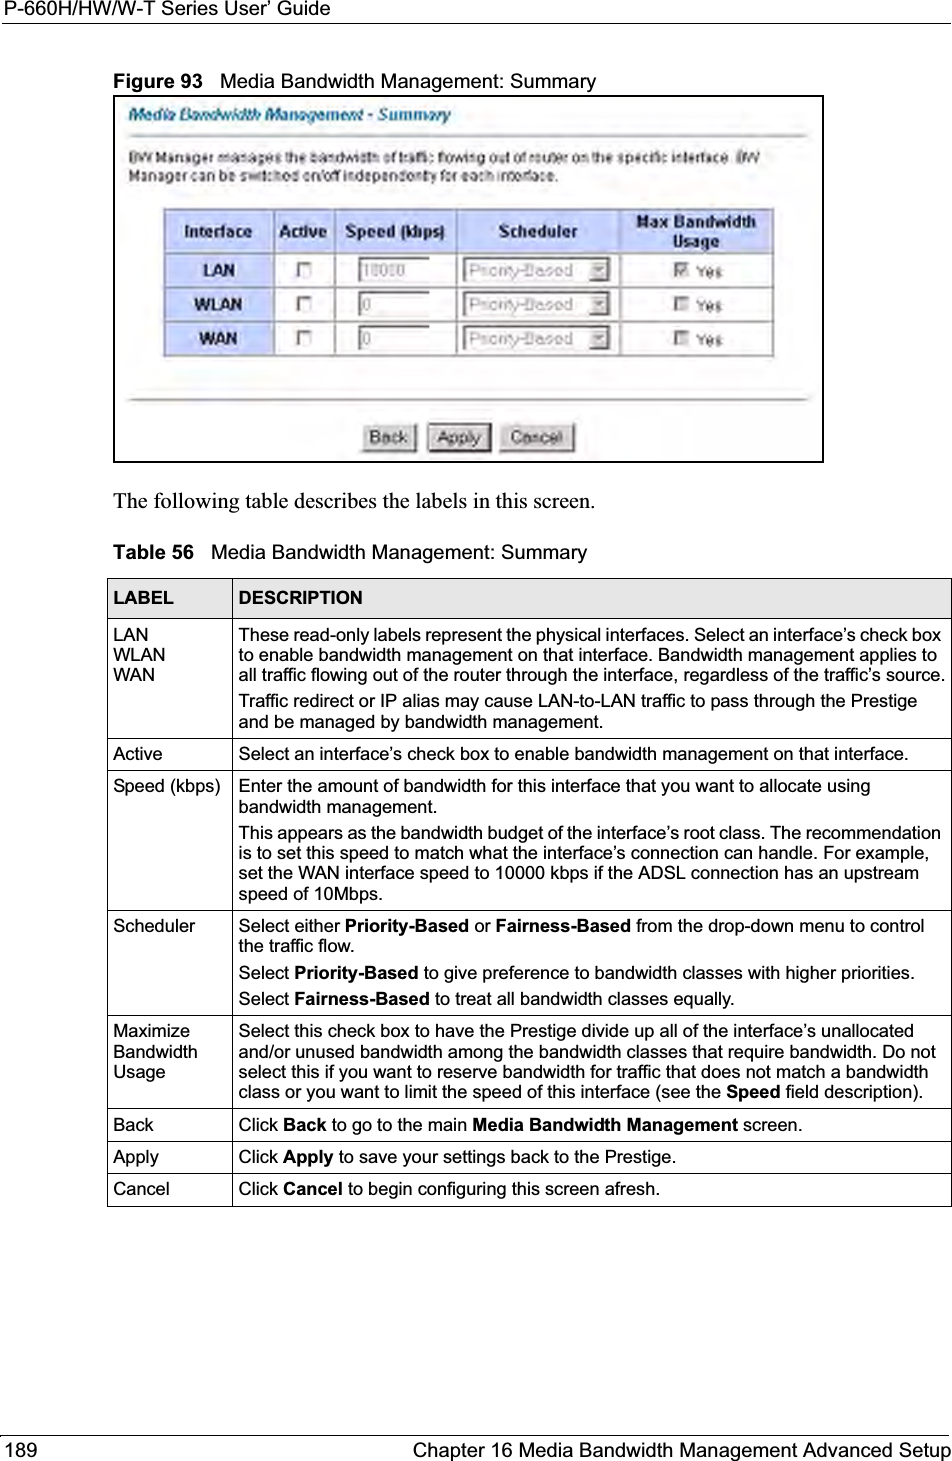 P-660H/HW/W-T Series User’ Guide189 Chapter 16 Media Bandwidth Management Advanced SetupFigure 93   Media Bandwidth Management: SummaryThe following table describes the labels in this screen. Table 56   Media Bandwidth Management: SummaryLABEL DESCRIPTIONLANWLANWANThese read-only labels represent the physical interfaces. Select an interface’s check box to enable bandwidth management on that interface. Bandwidth management applies to all traffic flowing out of the router through the interface, regardless of the traffic’s source.Traffic redirect or IP alias may cause LAN-to-LAN traffic to pass through the Prestige and be managed by bandwidth management.Active Select an interface’s check box to enable bandwidth management on that interface. Speed (kbps) Enter the amount of bandwidth for this interface that you want to allocate using bandwidth management. This appears as the bandwidth budget of the interface’s root class. The recommendation is to set this speed to match what the interface’s connection can handle. For example, set the WAN interface speed to 10000 kbps if the ADSL connection has an upstream speed of 10Mbps.Scheduler Select either Priority-Based or Fairness-Based from the drop-down menu to control the traffic flow. Select Priority-Based to give preference to bandwidth classes with higher priorities. Select Fairness-Based to treat all bandwidth classes equally.MaximizeBandwidth UsageSelect this check box to have the Prestige divide up all of the interface’s unallocated and/or unused bandwidth among the bandwidth classes that require bandwidth. Do not select this if you want to reserve bandwidth for traffic that does not match a bandwidth class or you want to limit the speed of this interface (see the Speed field description).Back Click Back to go to the main Media Bandwidth Management screen.Apply Click Apply to save your settings back to the Prestige.Cancel Click Cancel to begin configuring this screen afresh.